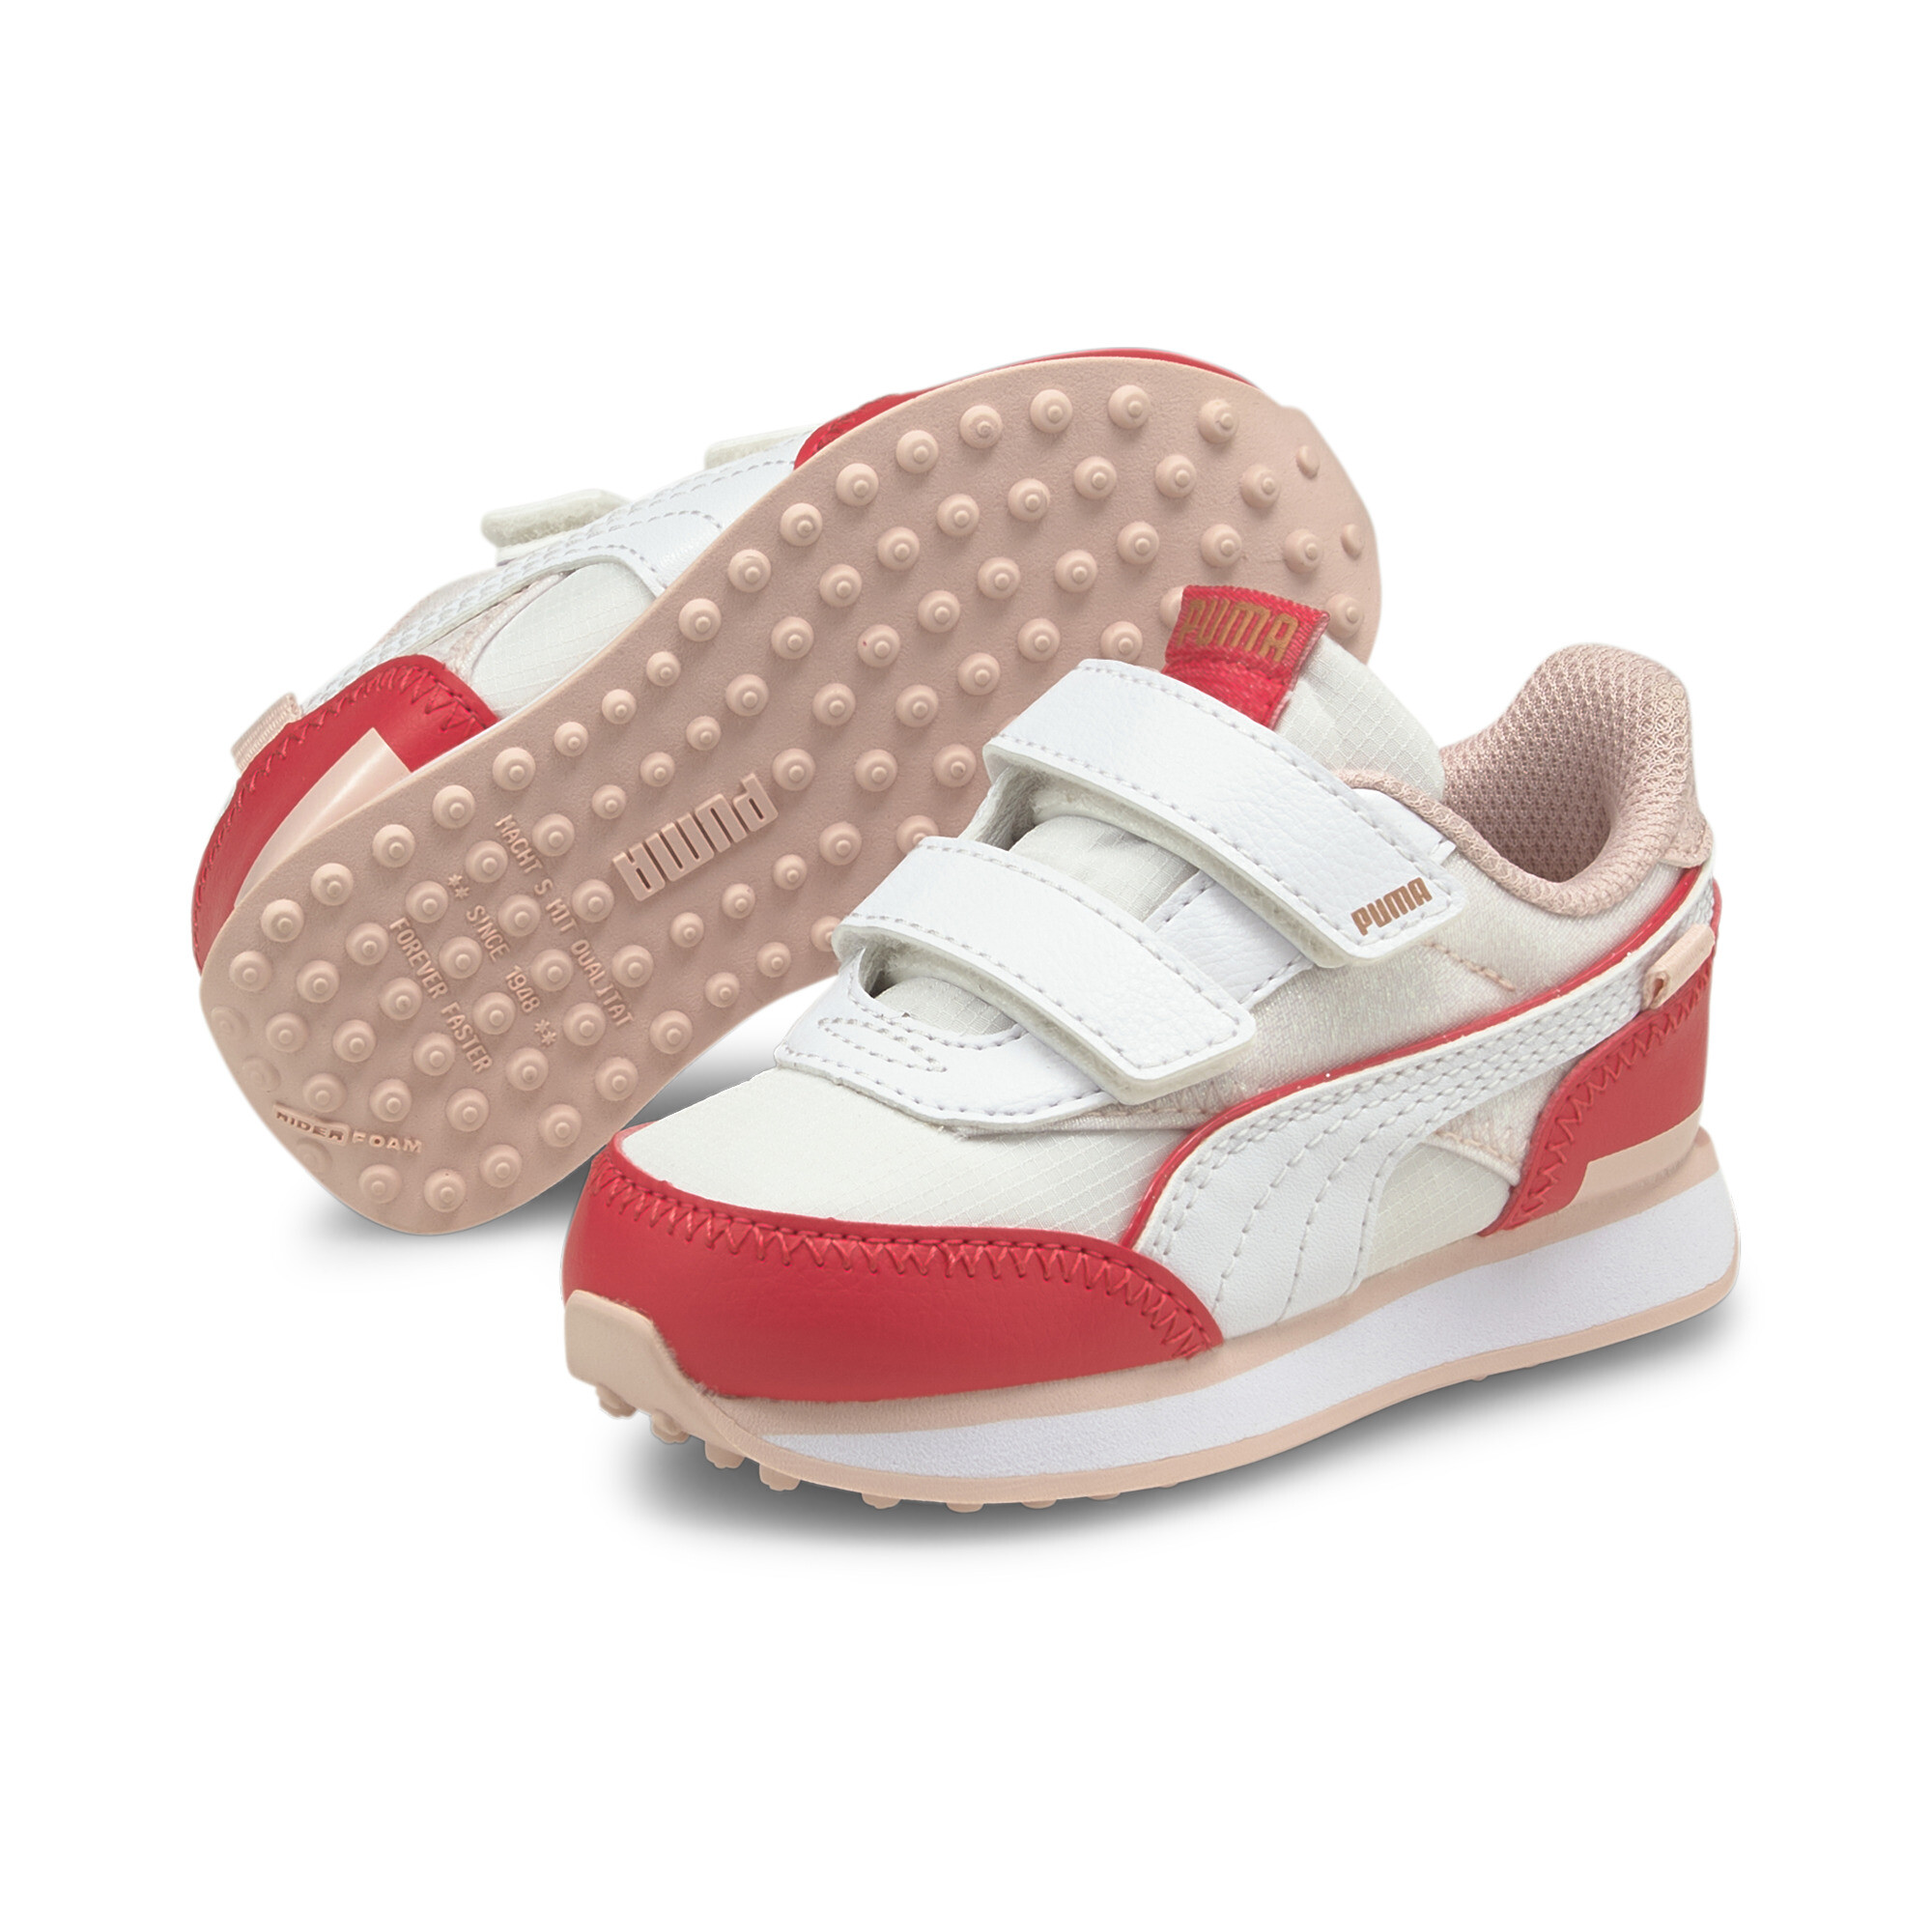 Women's Puma Future Rider Ballerina Babies' Trainers, Pink, Size 27, Shoes